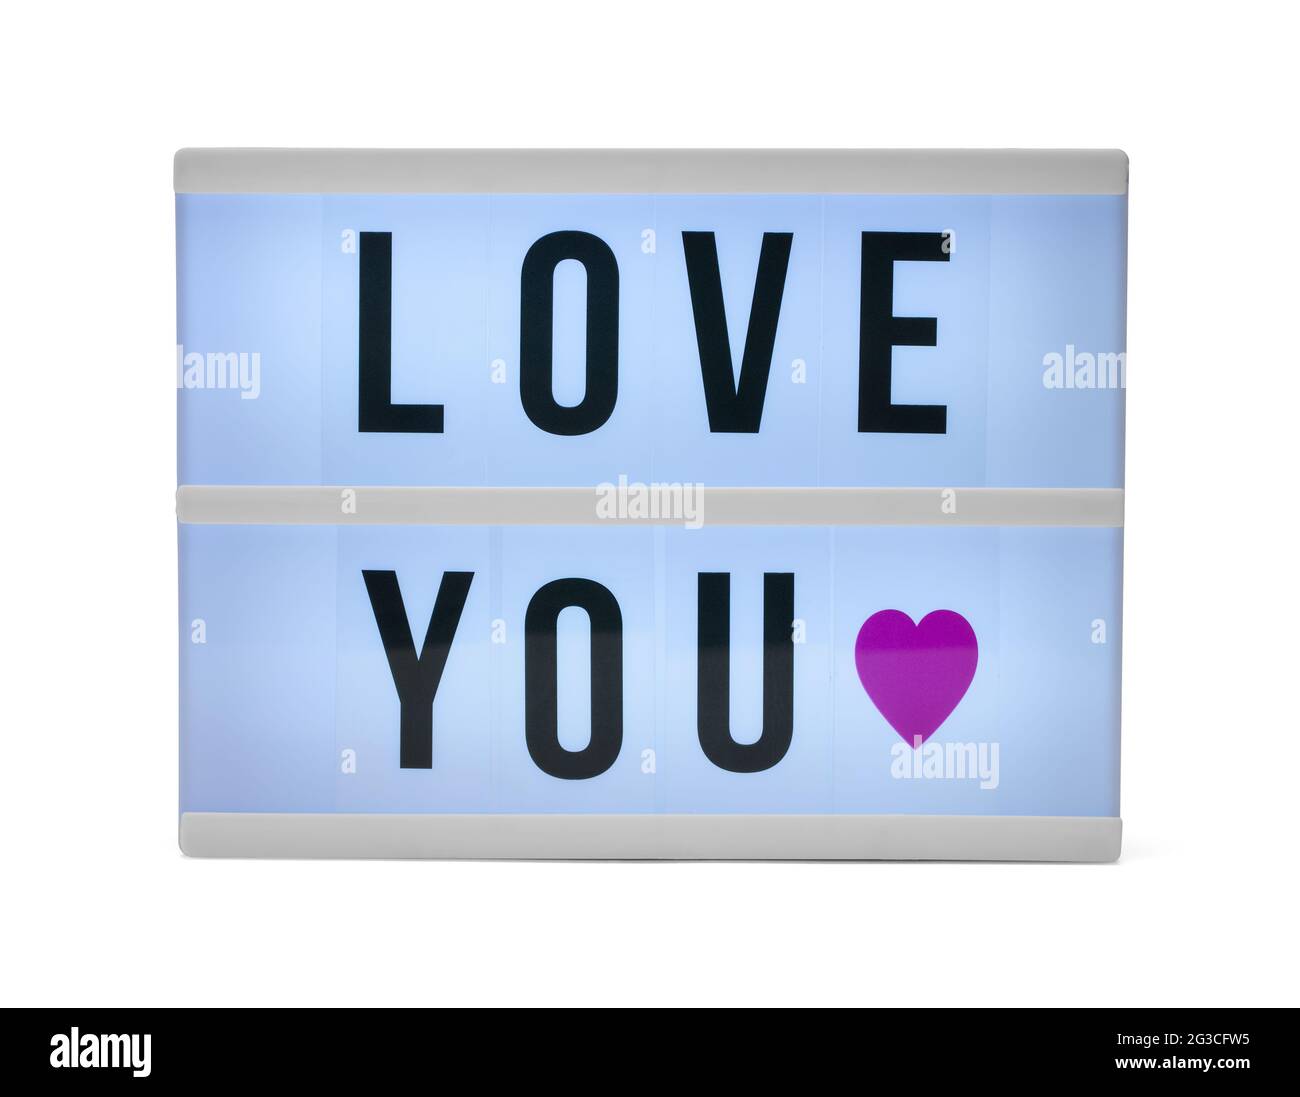 Love You Sign Cut Out on White. Stockfoto